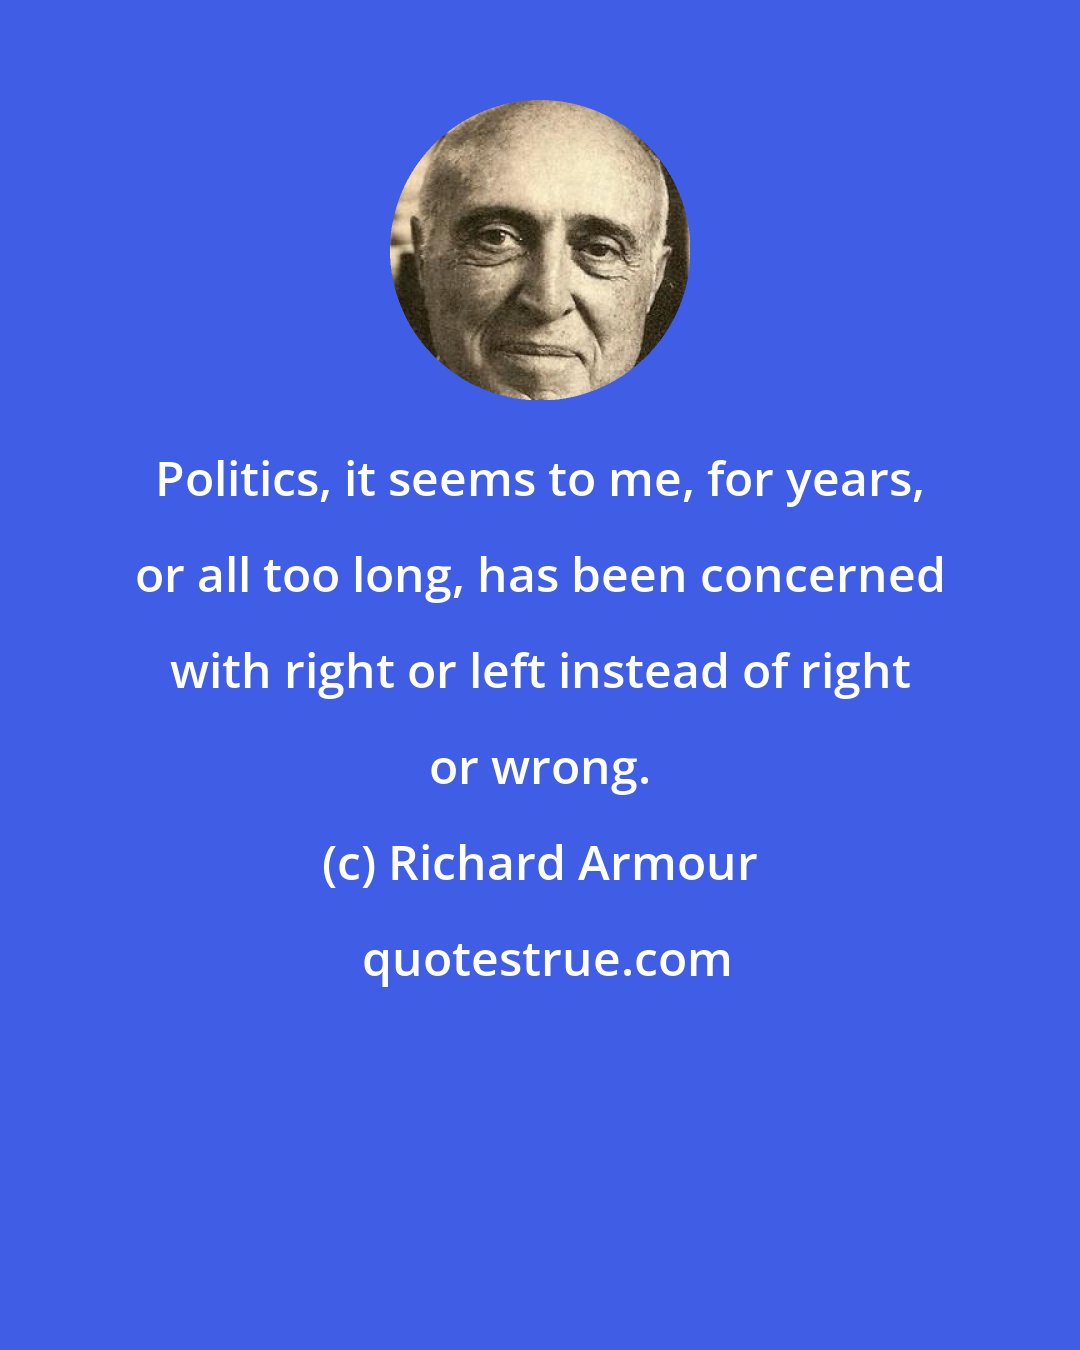 Richard Armour: Politics, it seems to me, for years, or all too long, has been concerned with right or left instead of right or wrong.